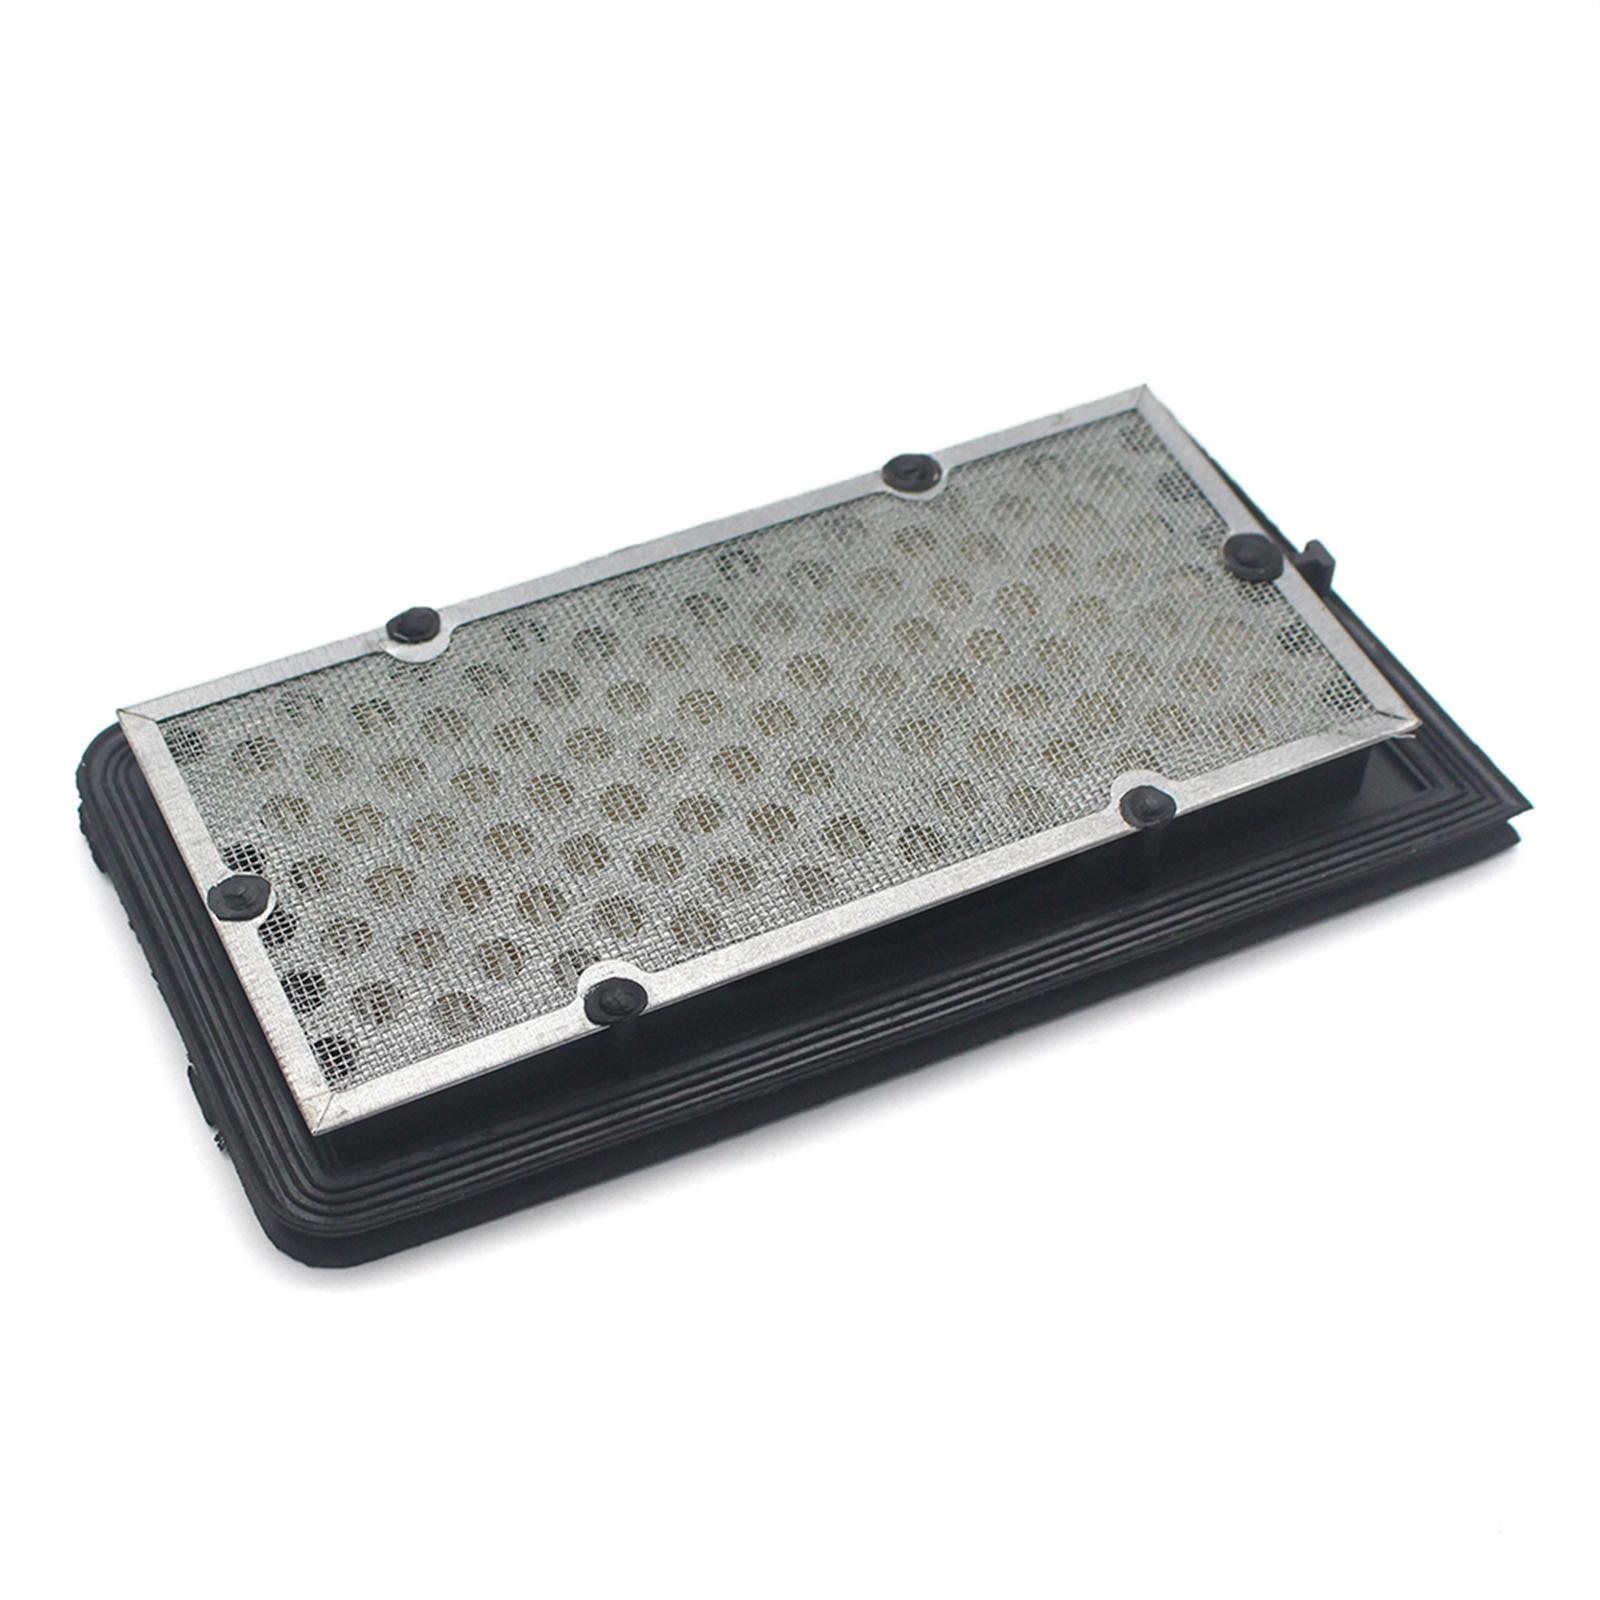 NEW Motorcycle Air Filter Fits for for Suzuki AN650 SKYWAVE   650 Sky wave650